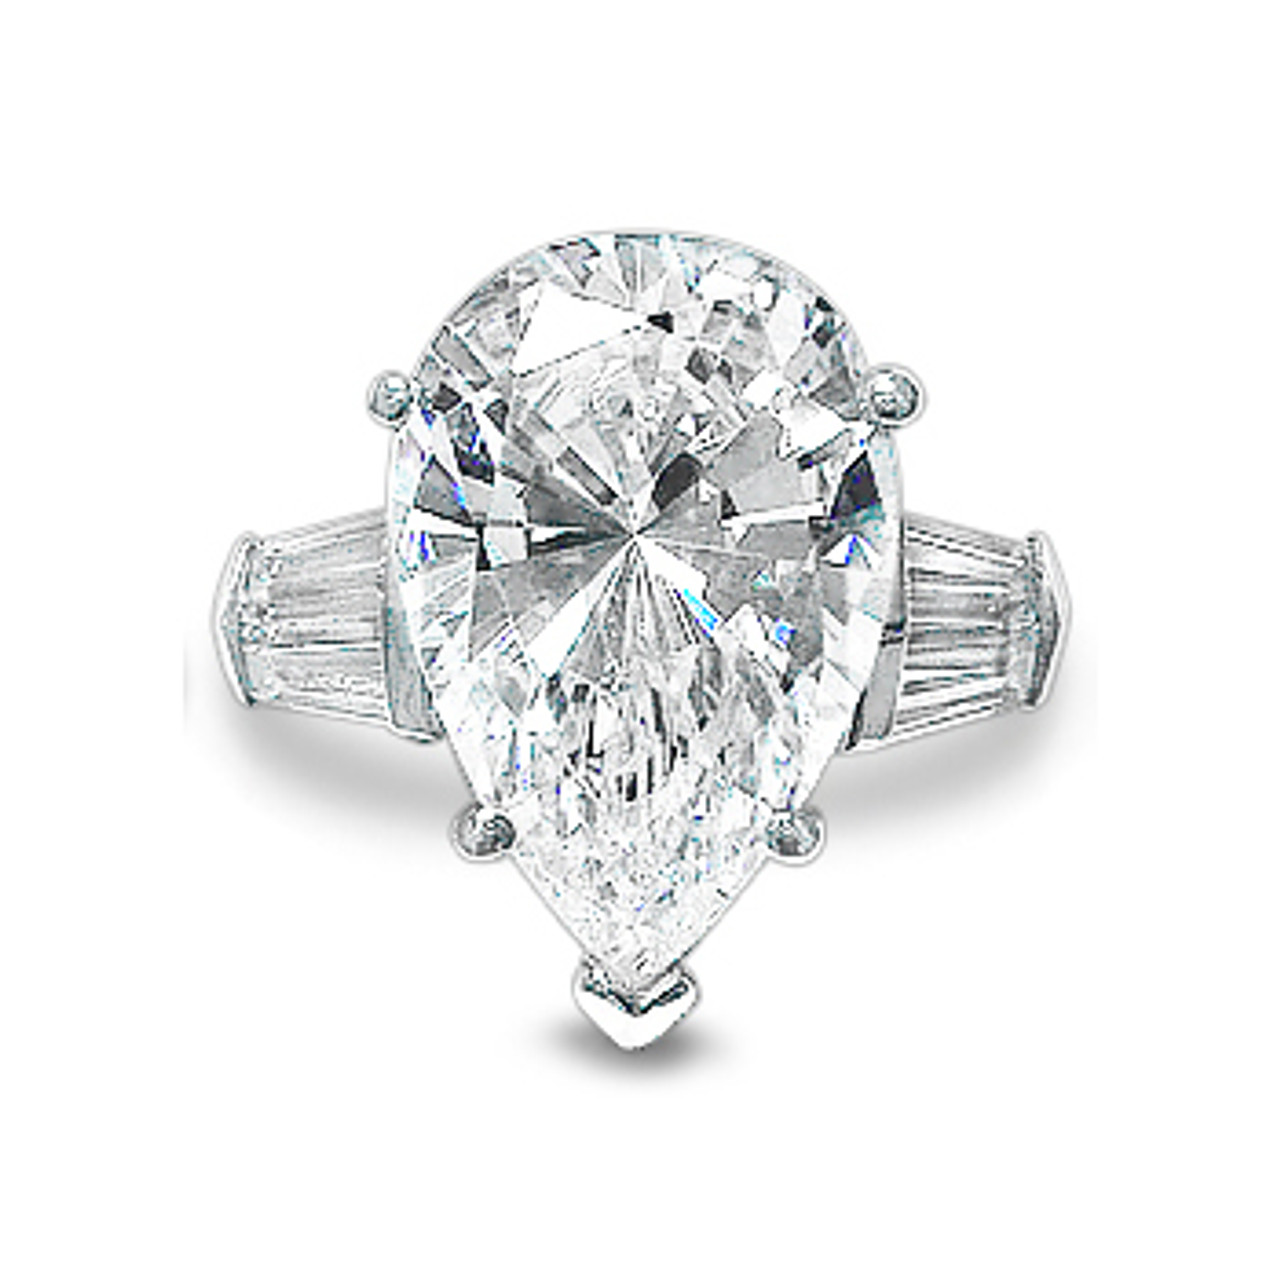 A Timeless Treasure: The 1.5 Carat Pear Ring As The Perfect 25th  Anniversary Band | Diamond Registry